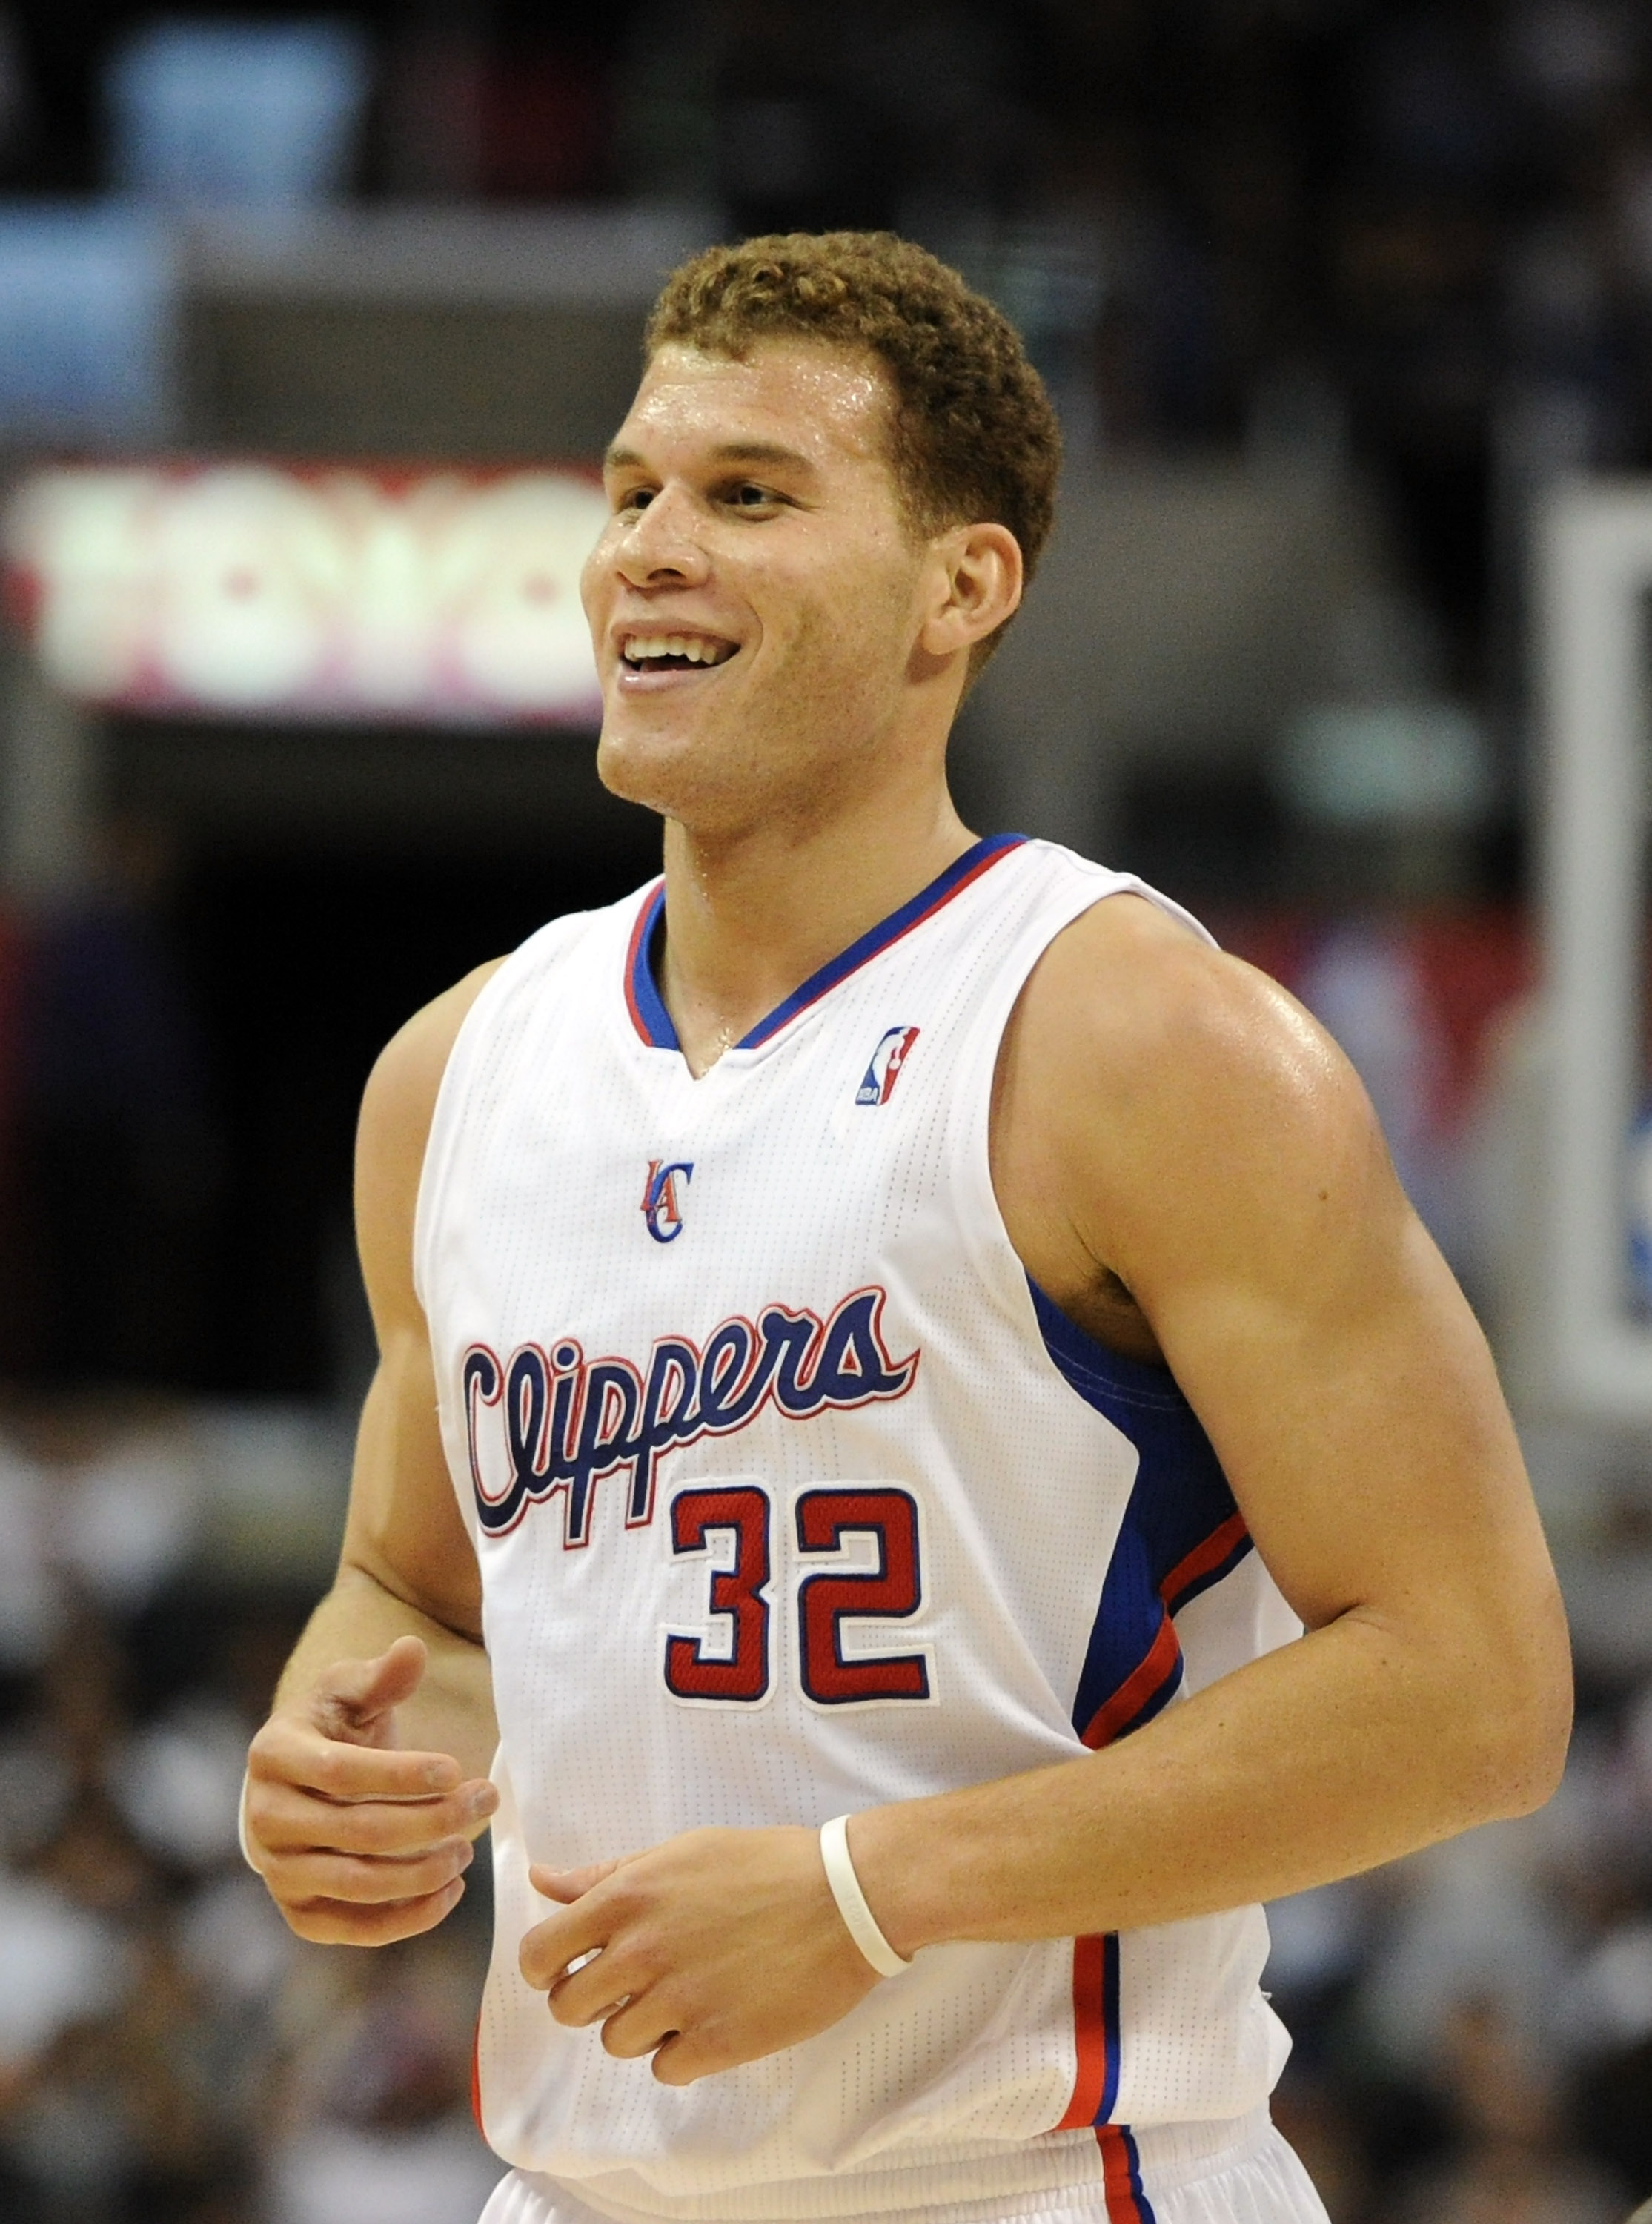 blake griffin young